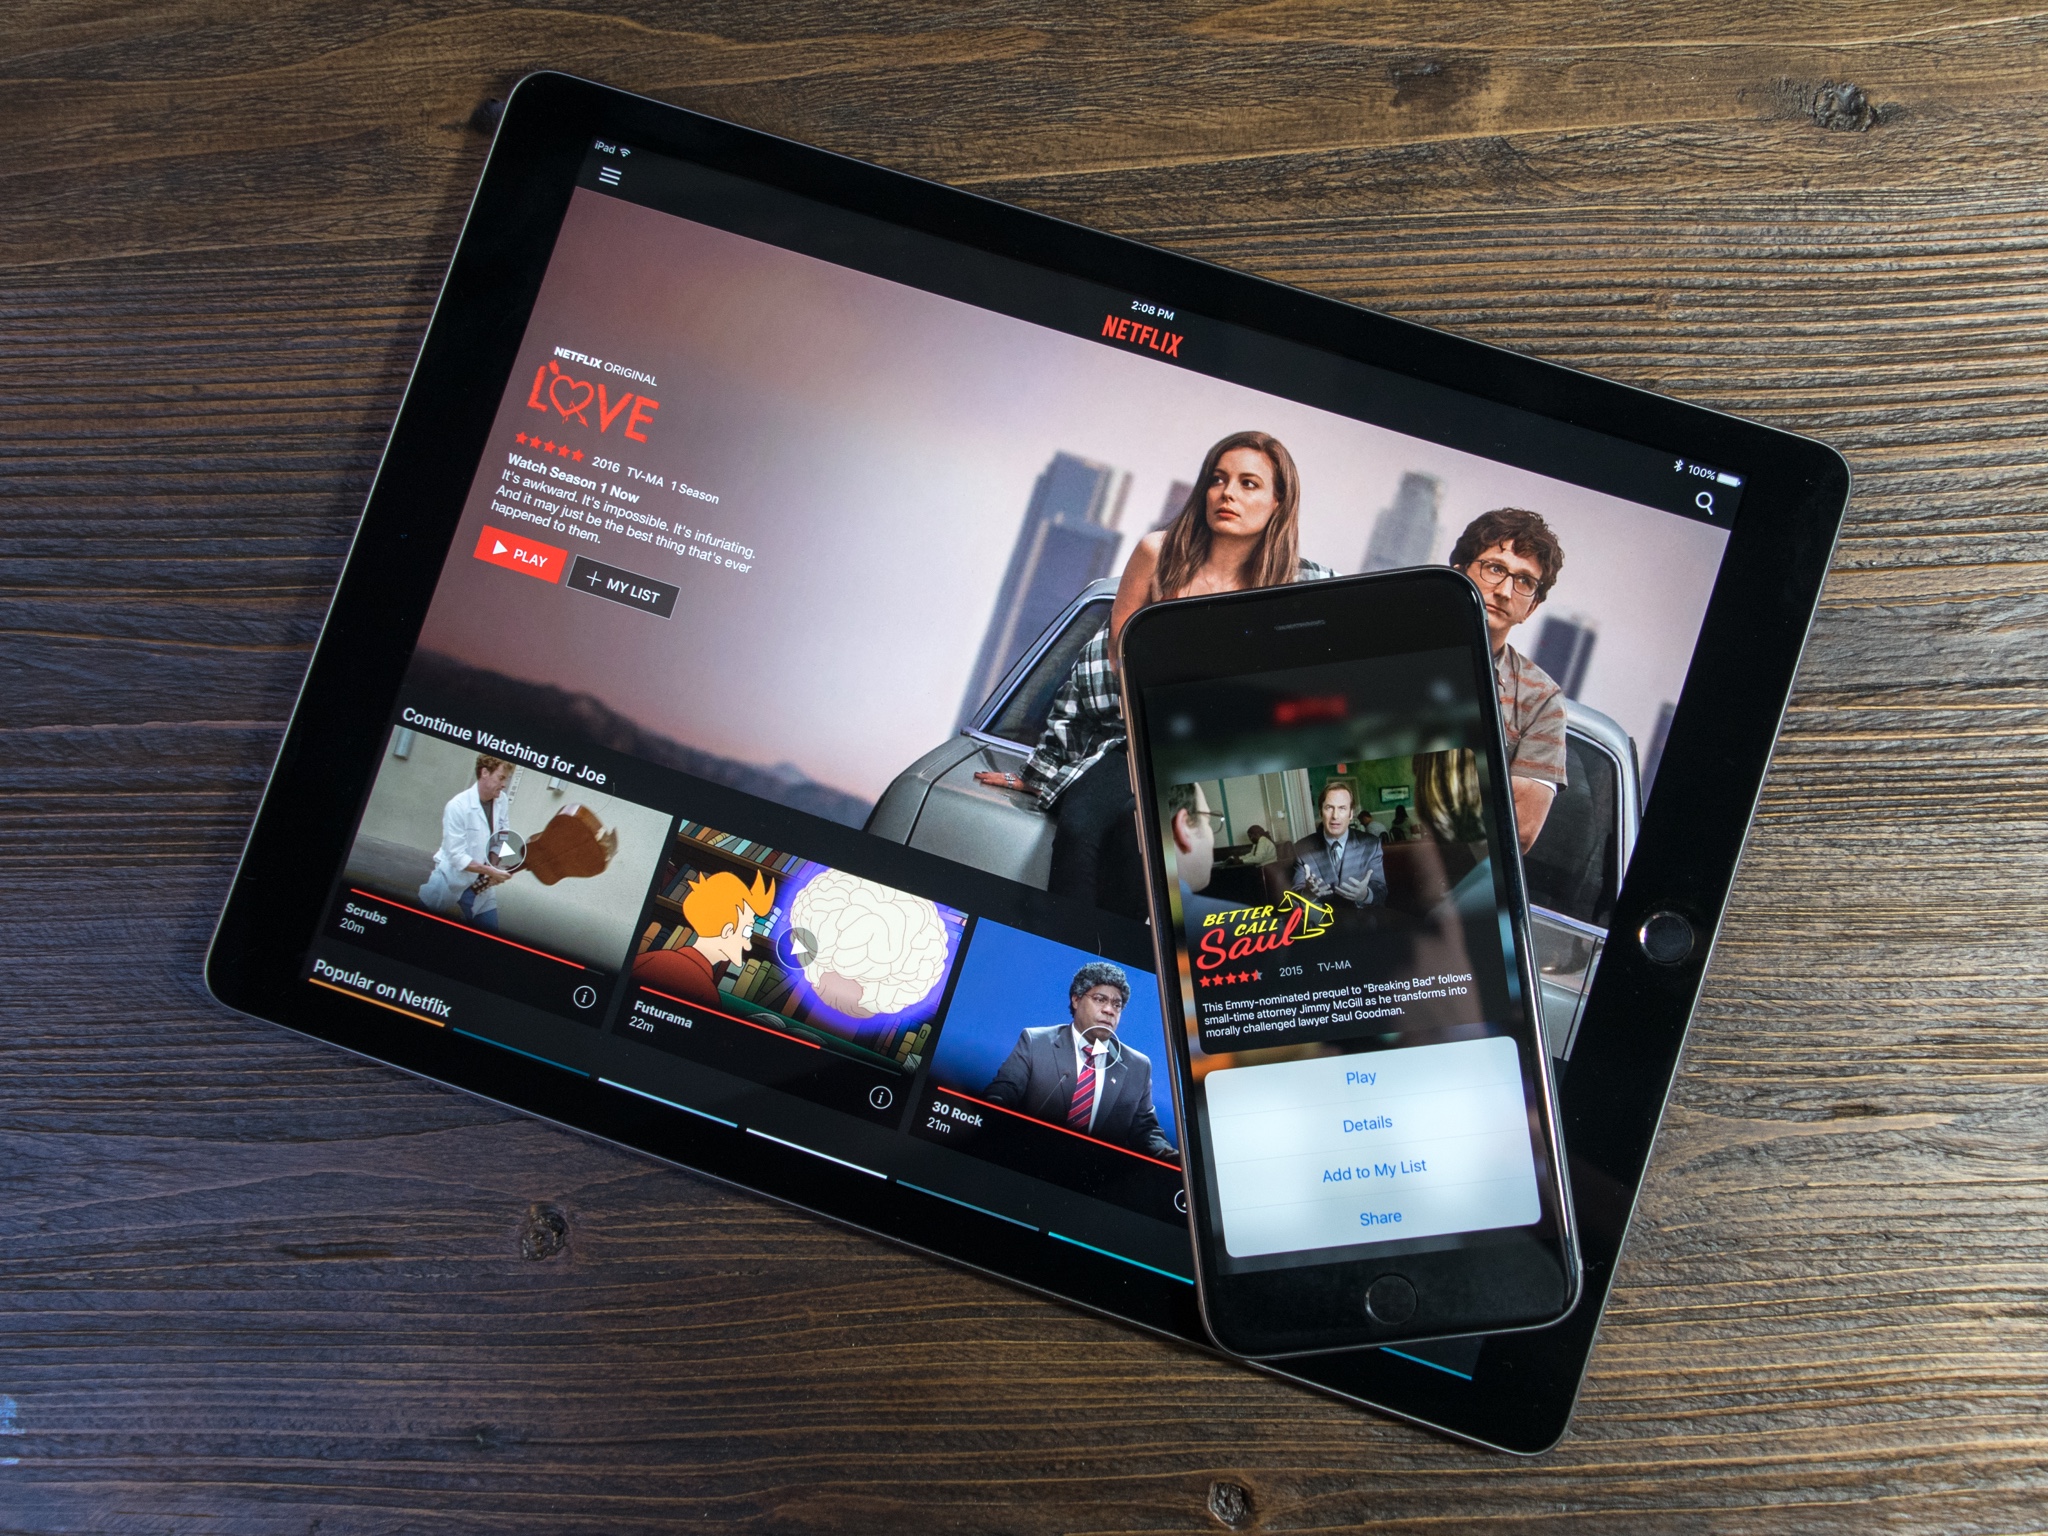 Netflix adds support for 3D Touch and iPad Pro | iMore